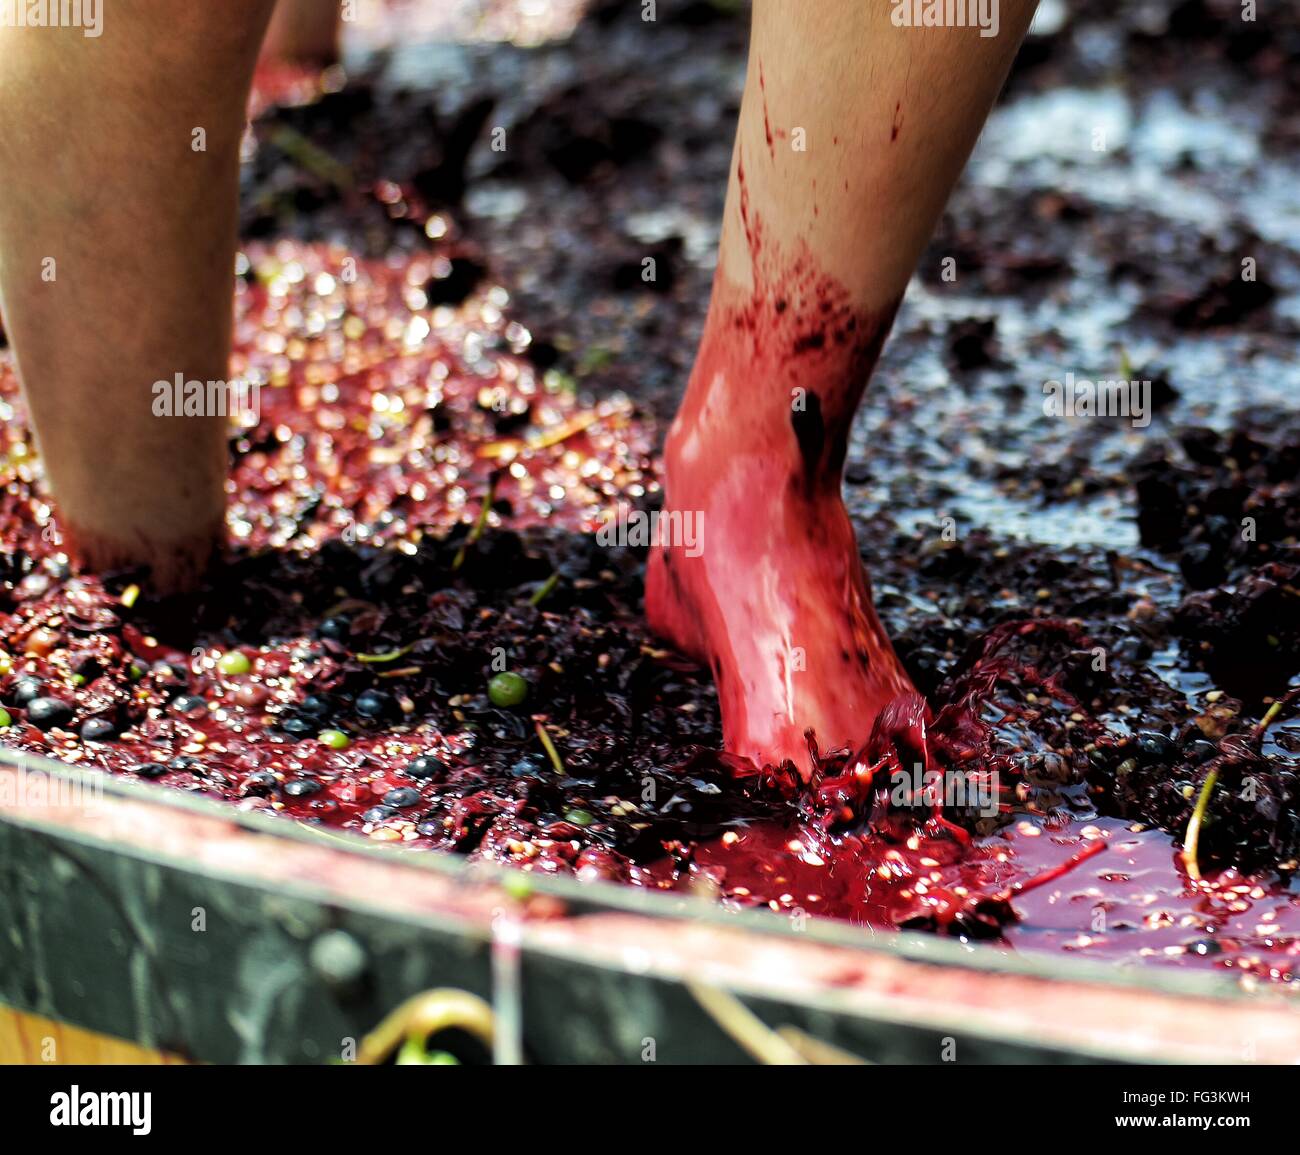 Low Section Of Person Stomping Grapes At Winery Stock Photo